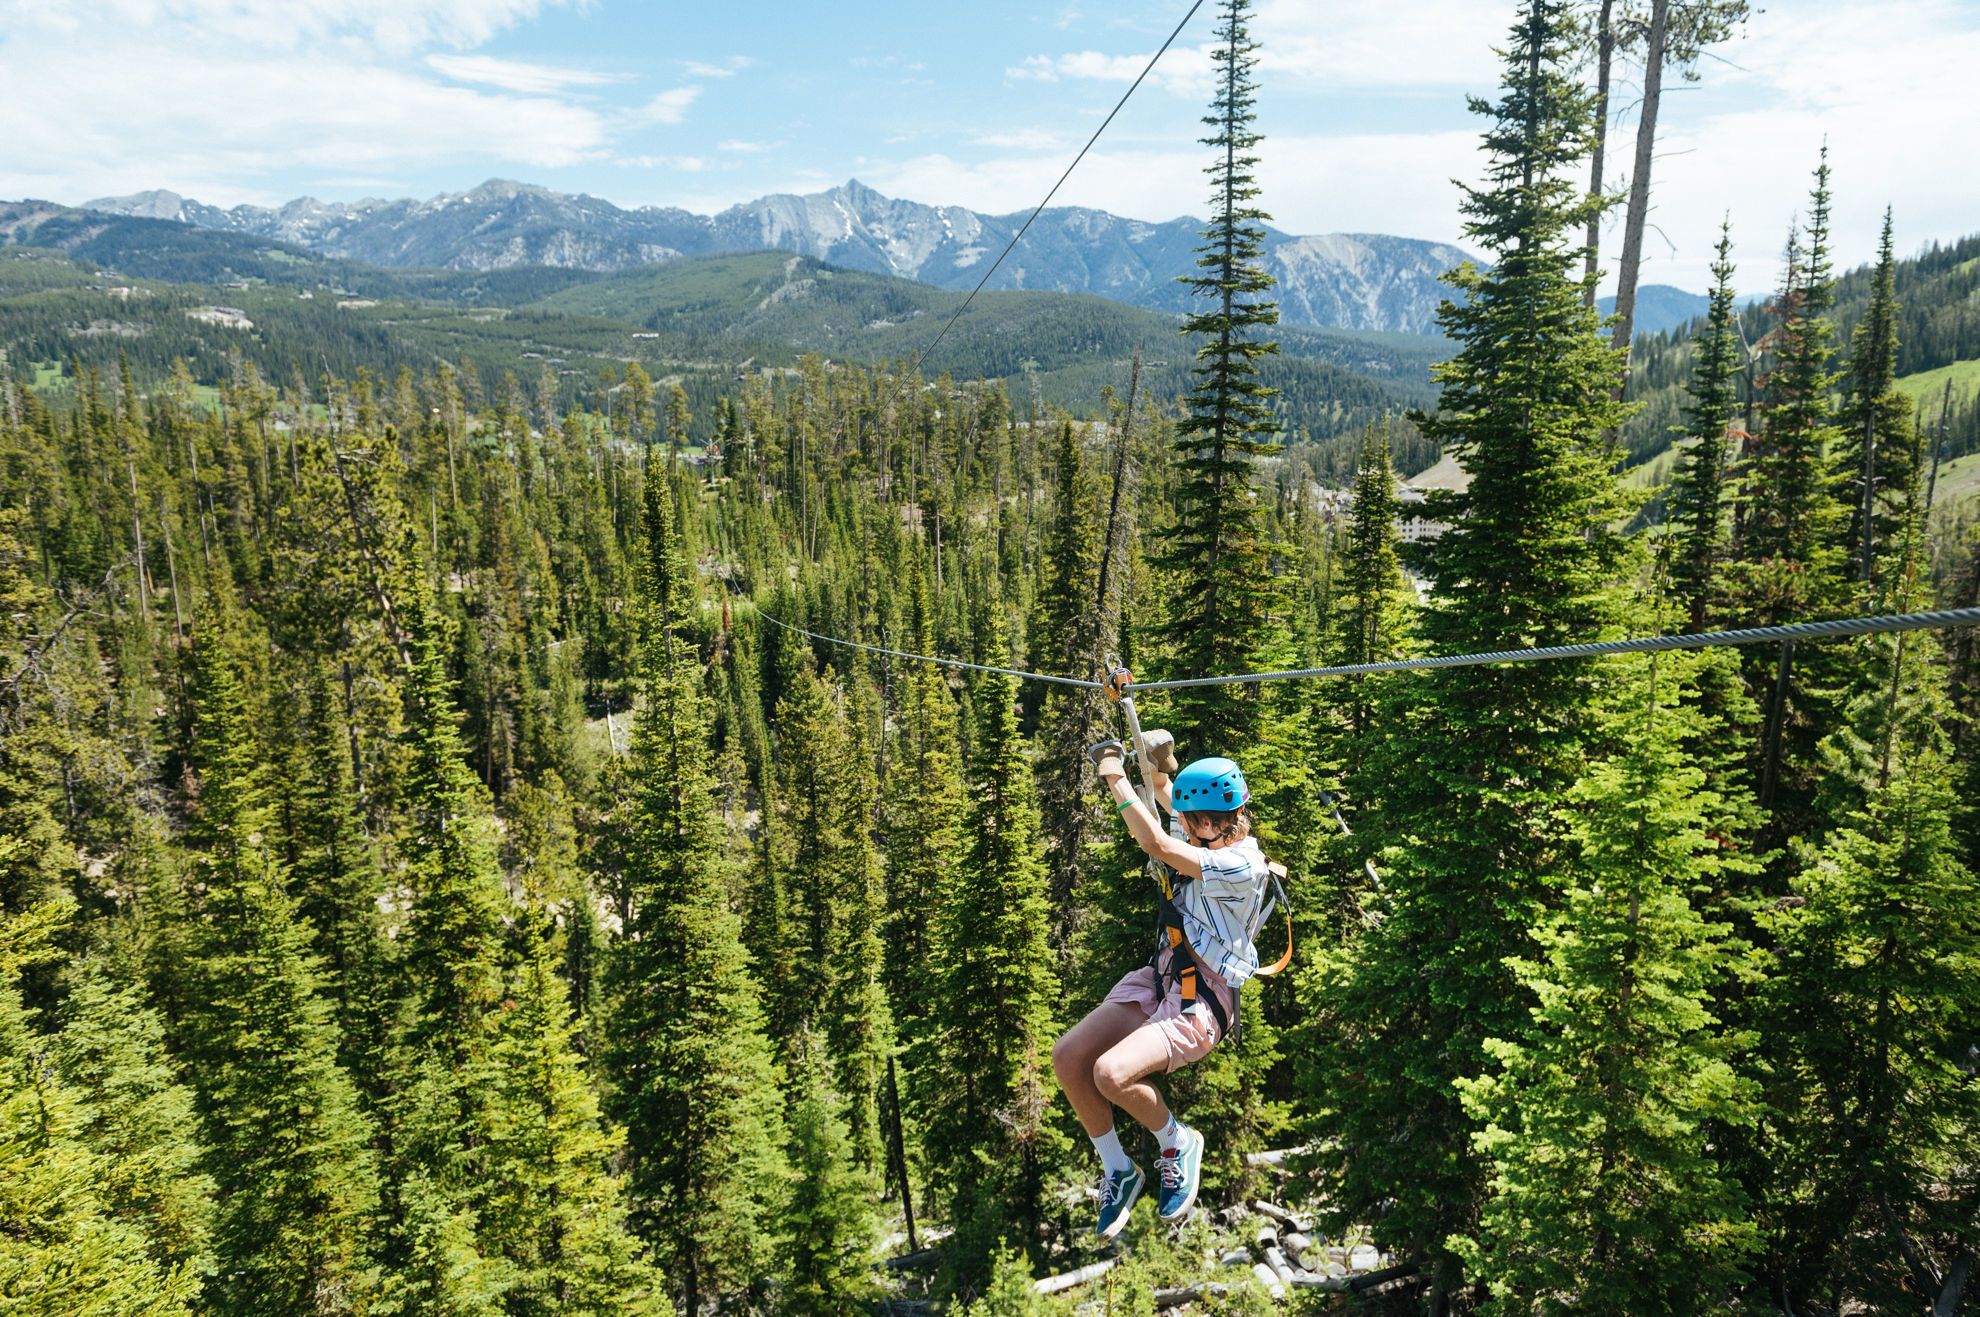 Ziplining with Mountains in the background